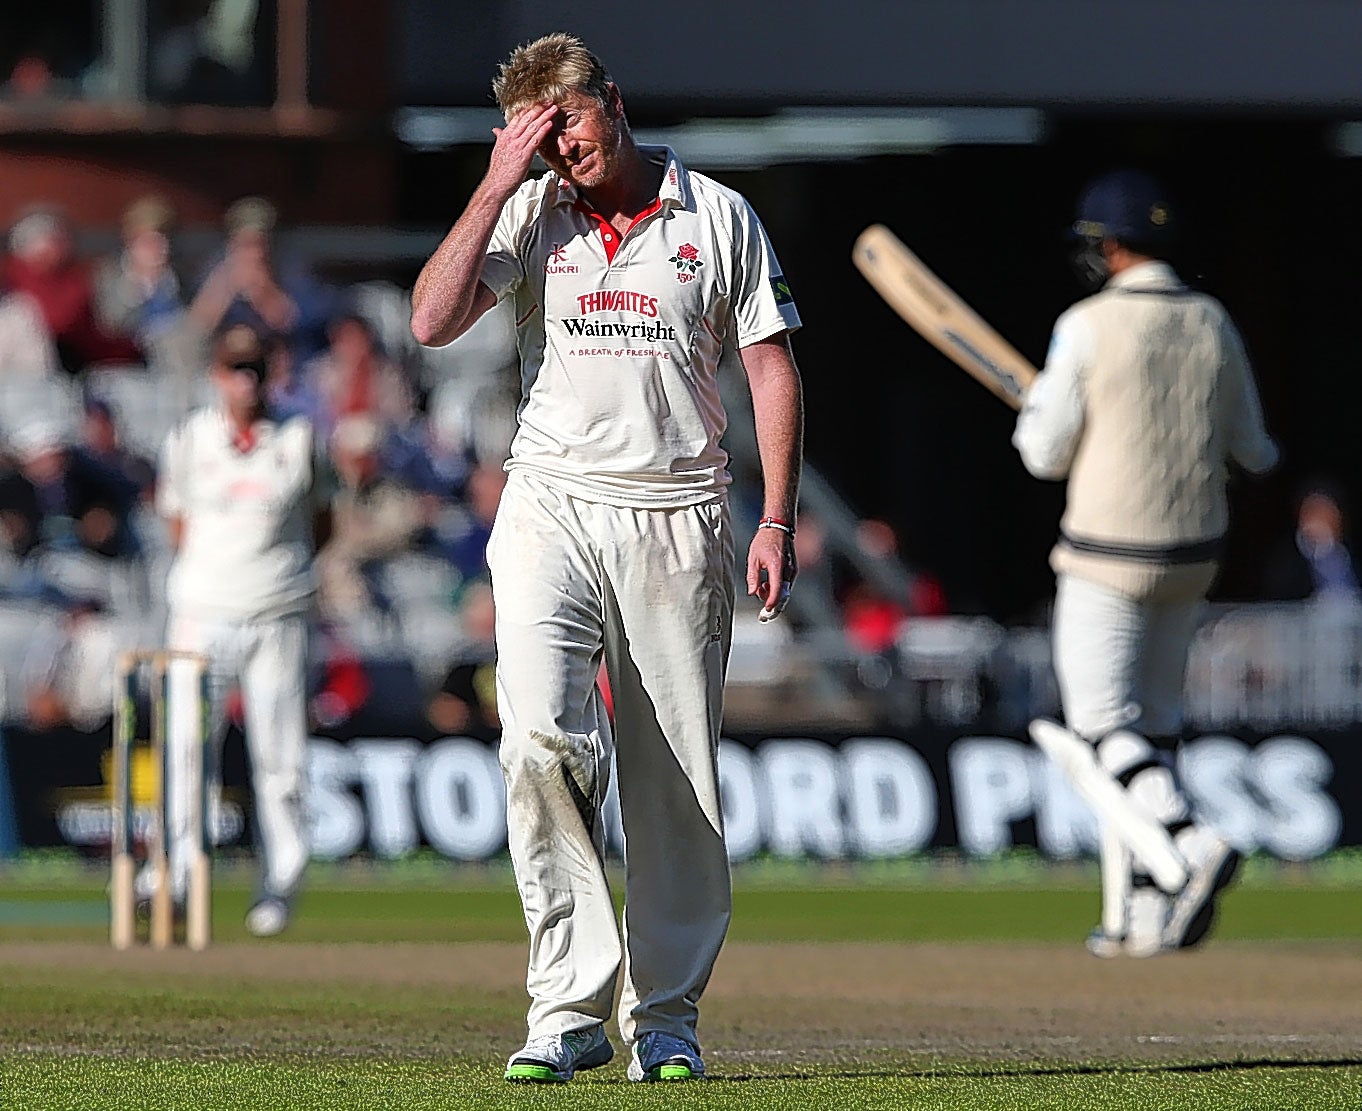 A despondent Glen Chapple, who is in line to take over as Lancashire head coach, feels the strain at Old Trafford